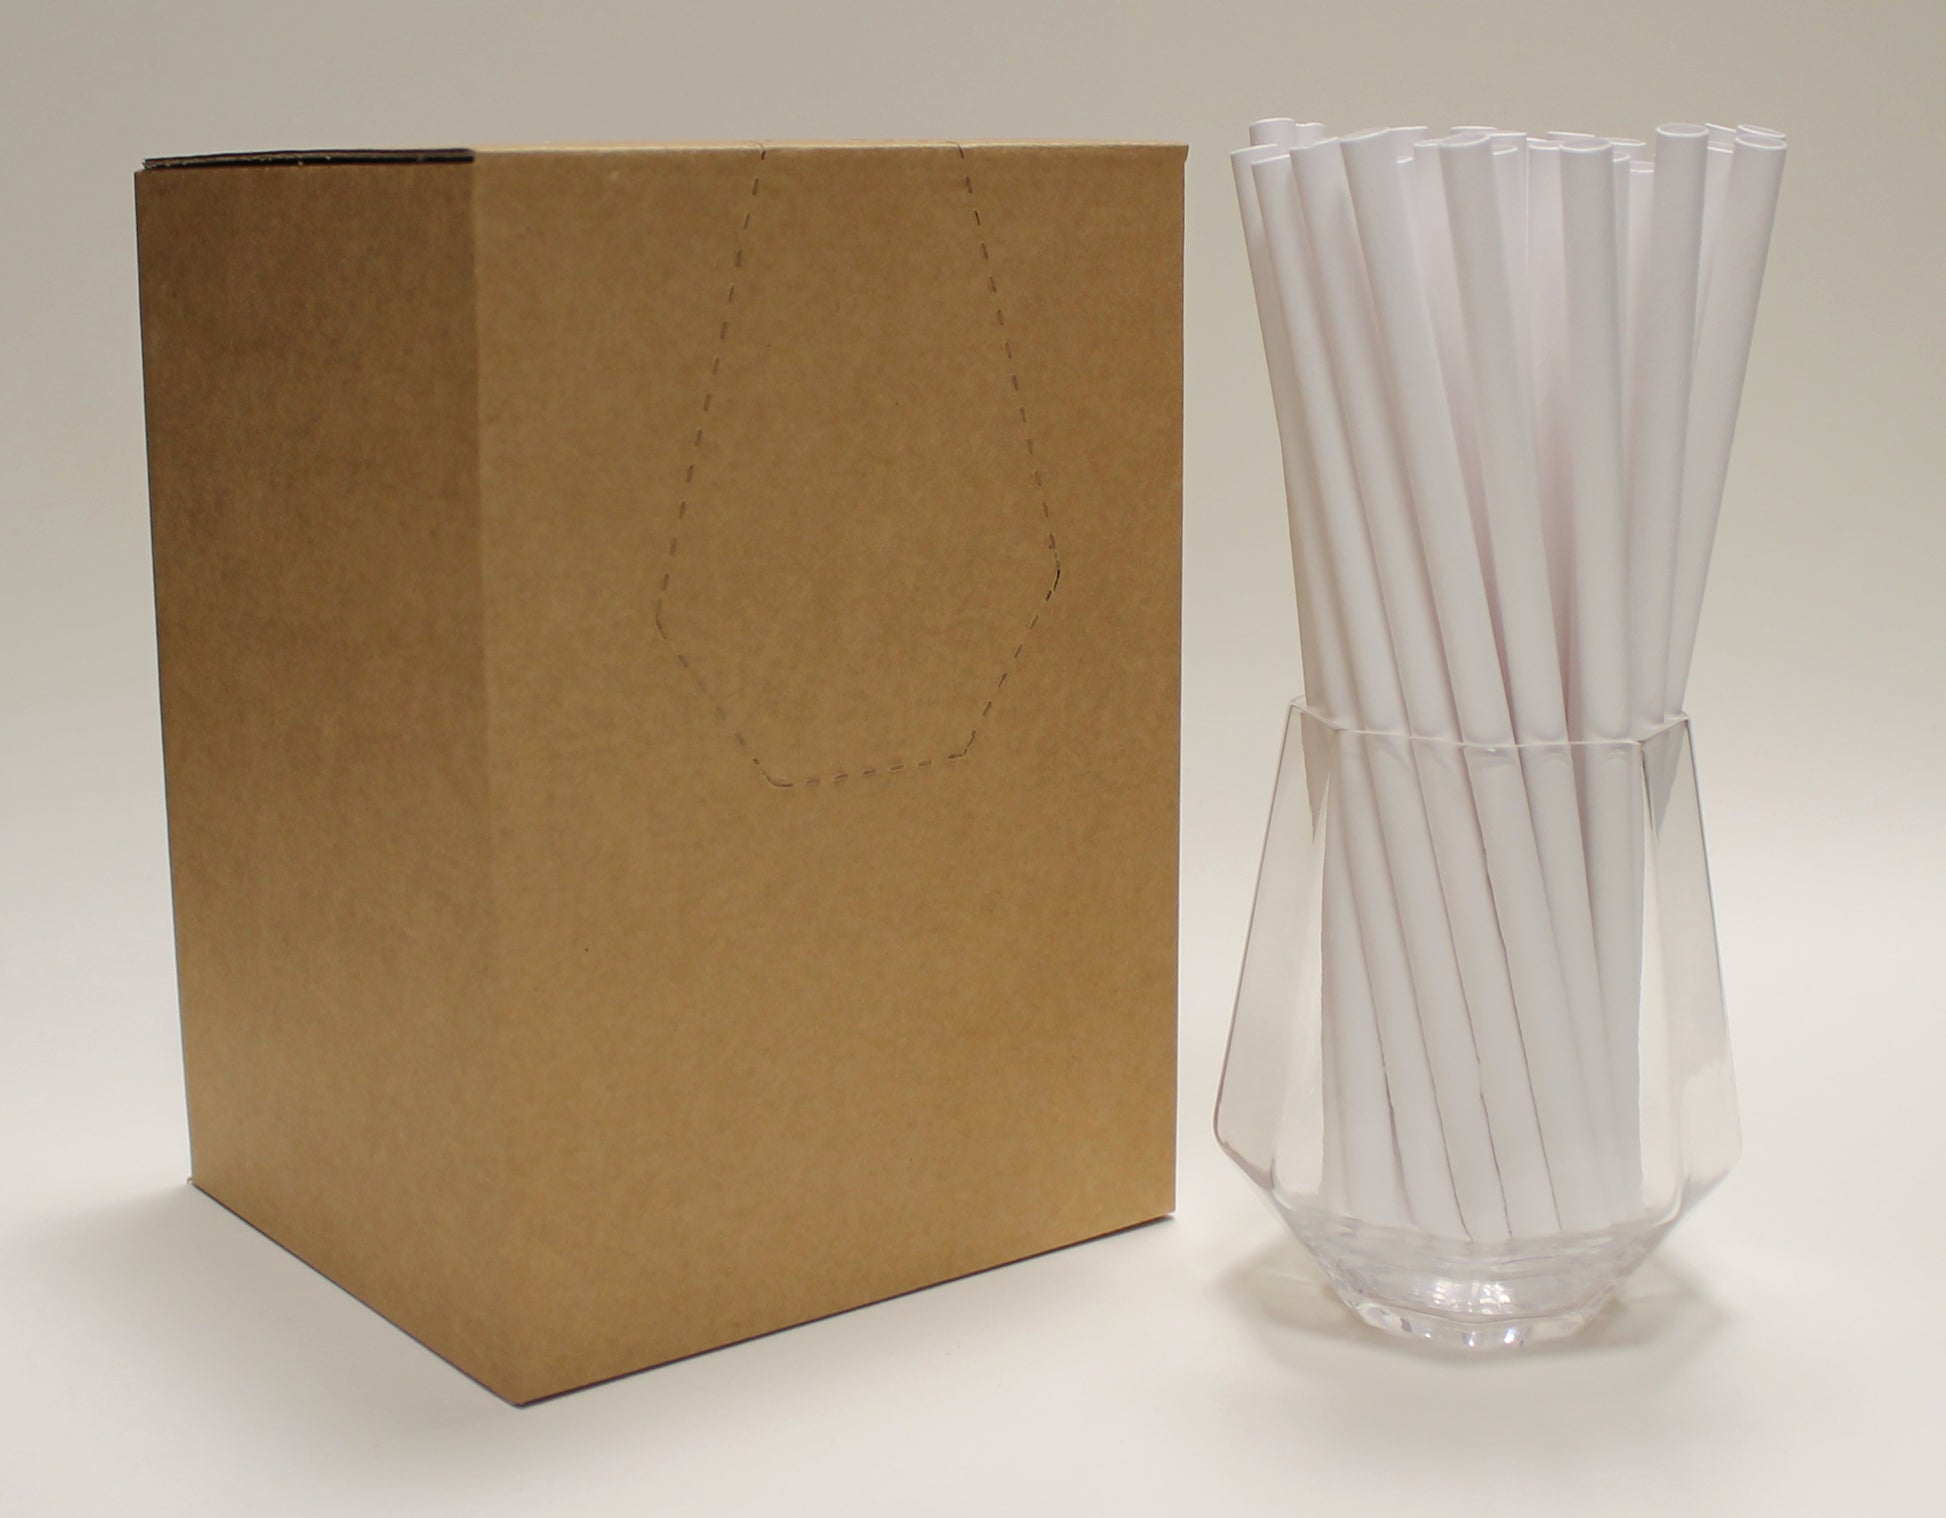 White Paper Straws (8mm x 200mm) - Quality Drinking Straws for Smoothies and Milkshakes - Intrinsic Paper Straws